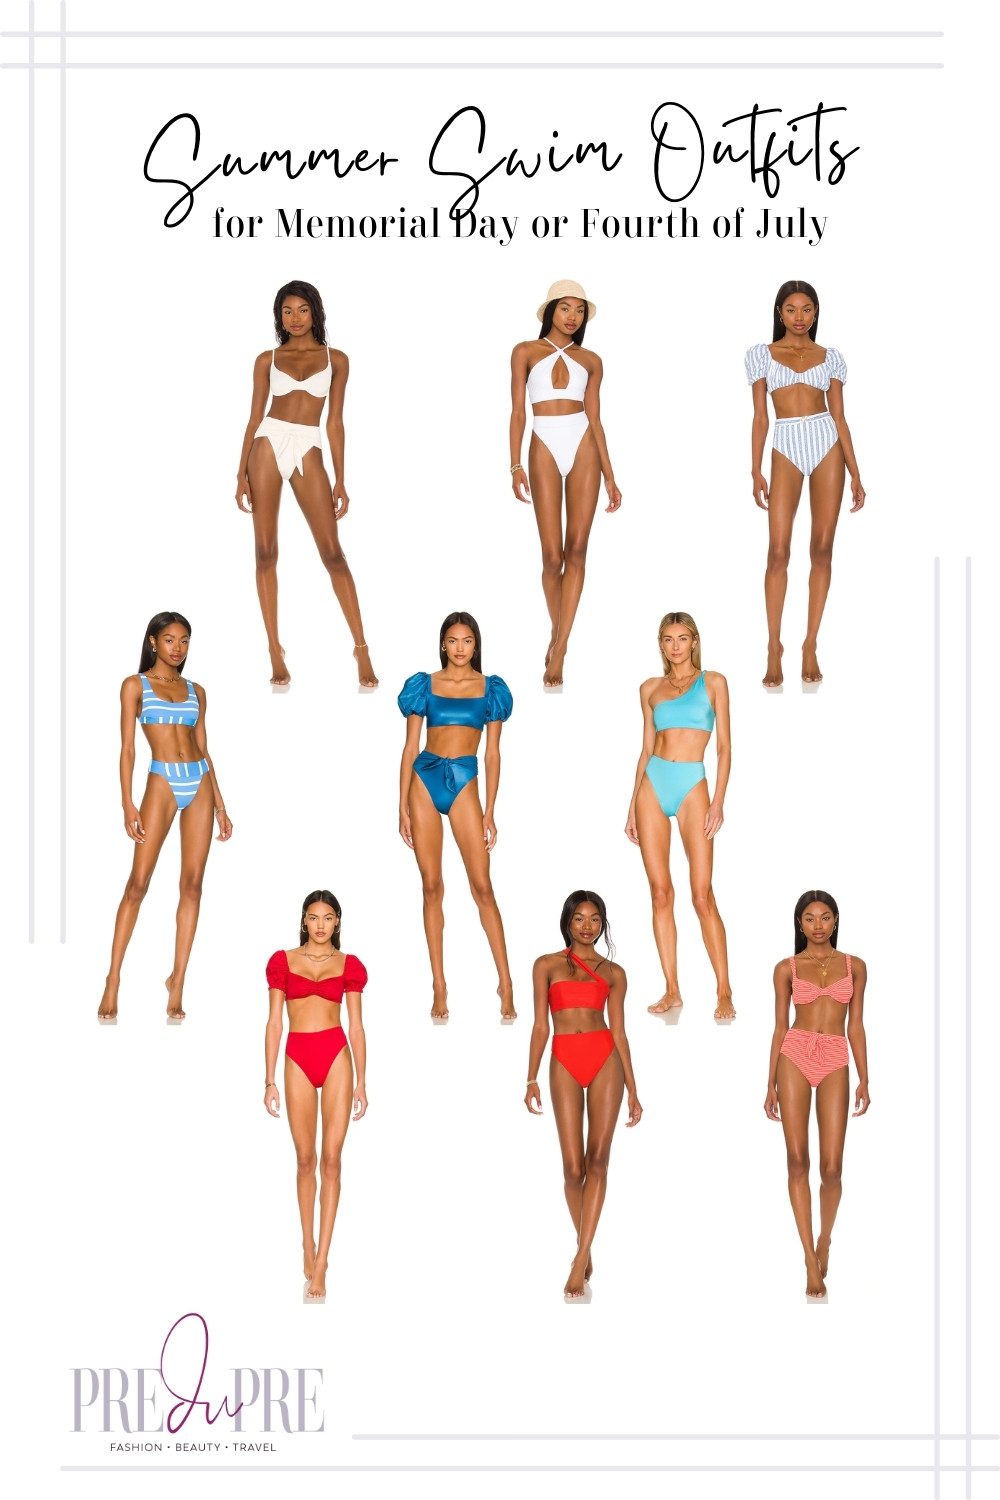 Collage of red, blue, and white high waist bikini sets for Memorial Day and/or Independence Day on Fourth of July.